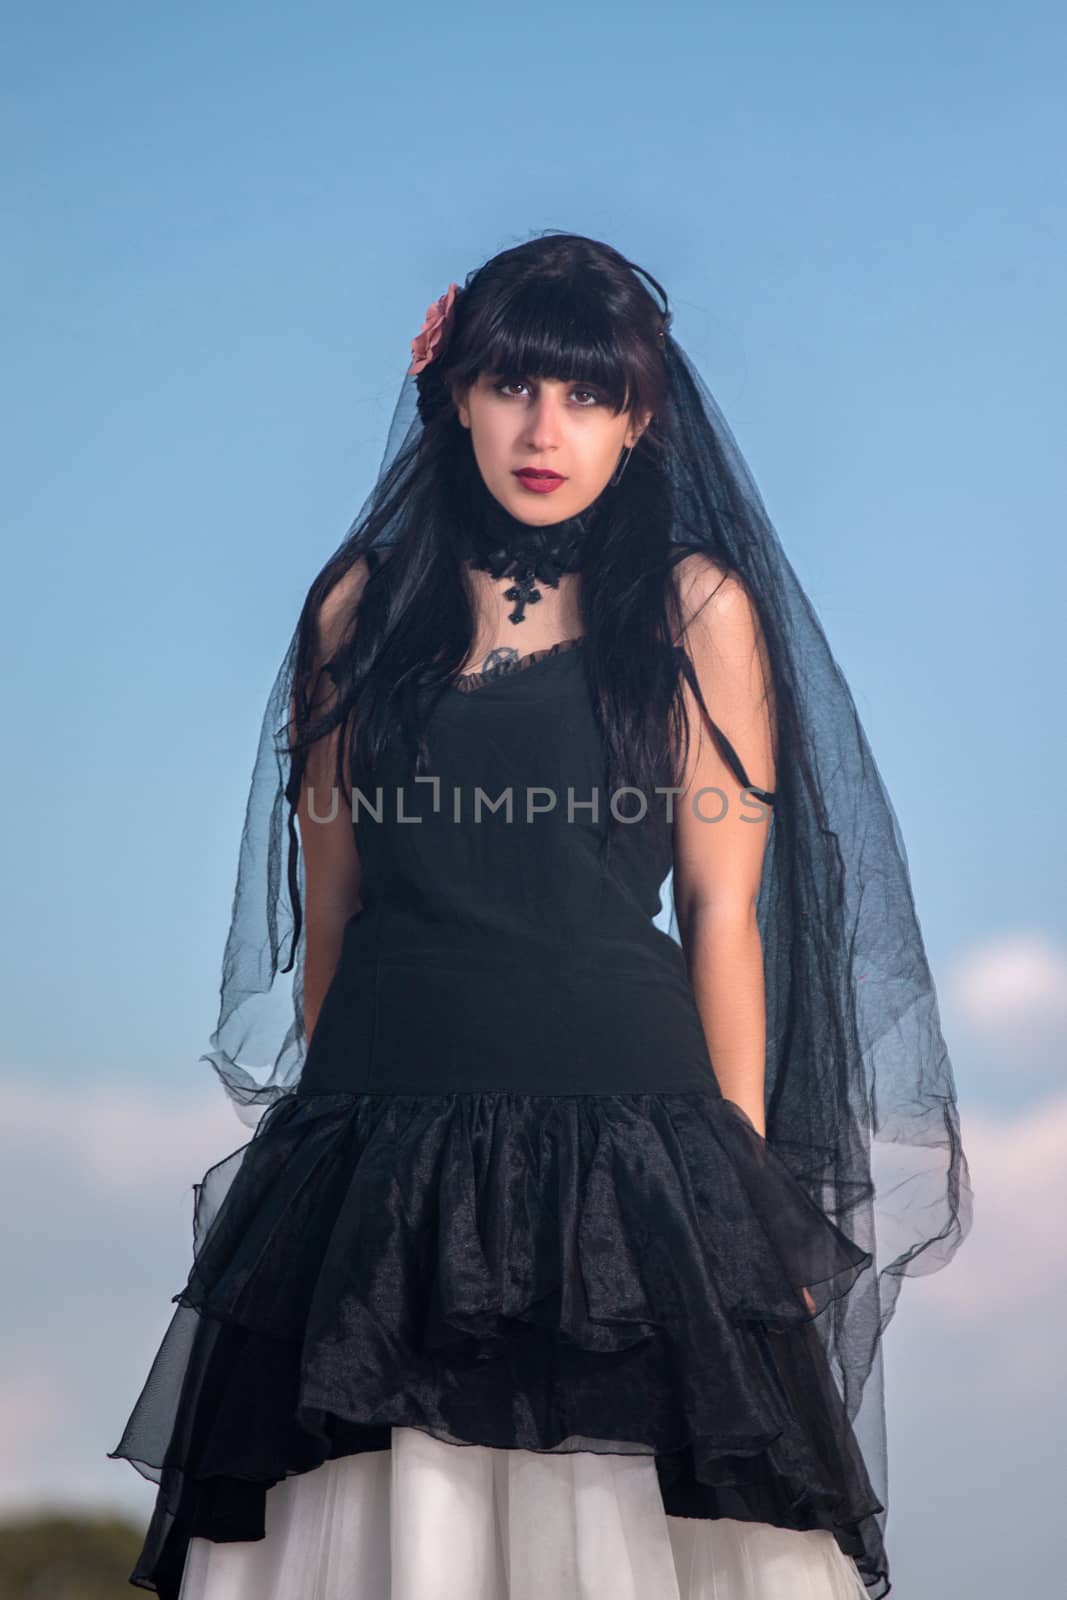 View of a beautiful young girl in gothic dark clothes.